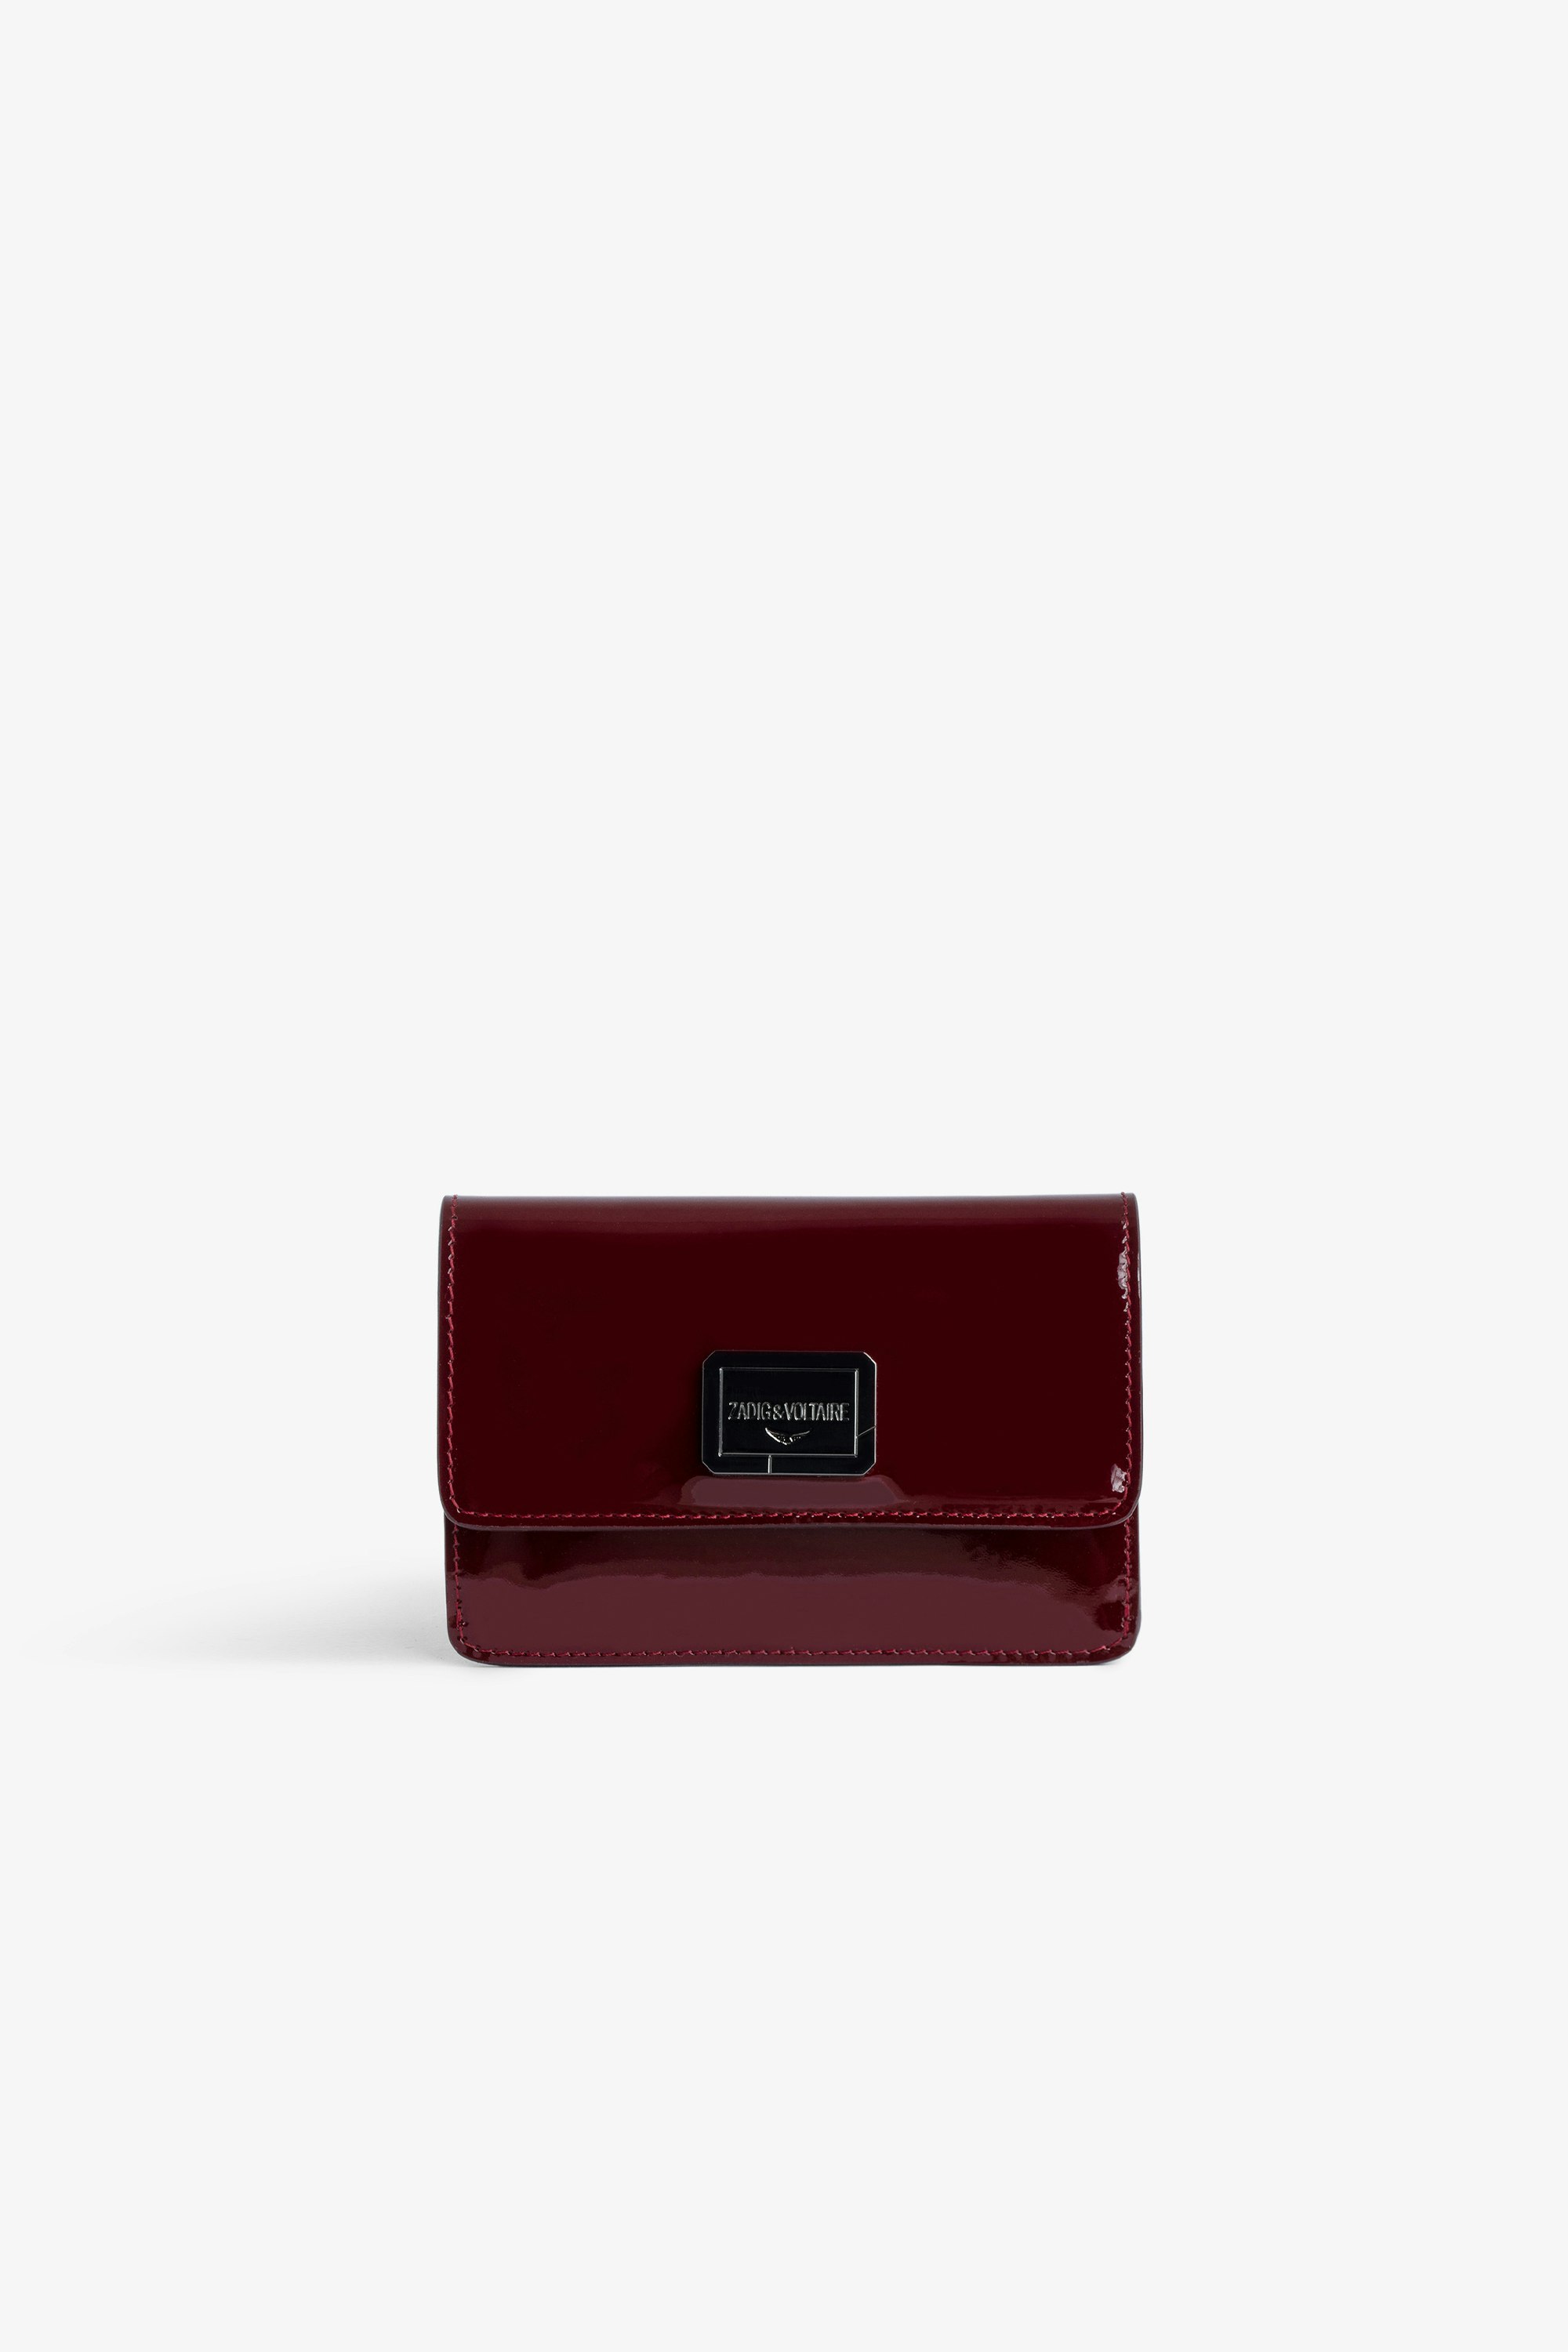 Le Cecilia Wallet Women's burgundy patent leather wallet with flap 